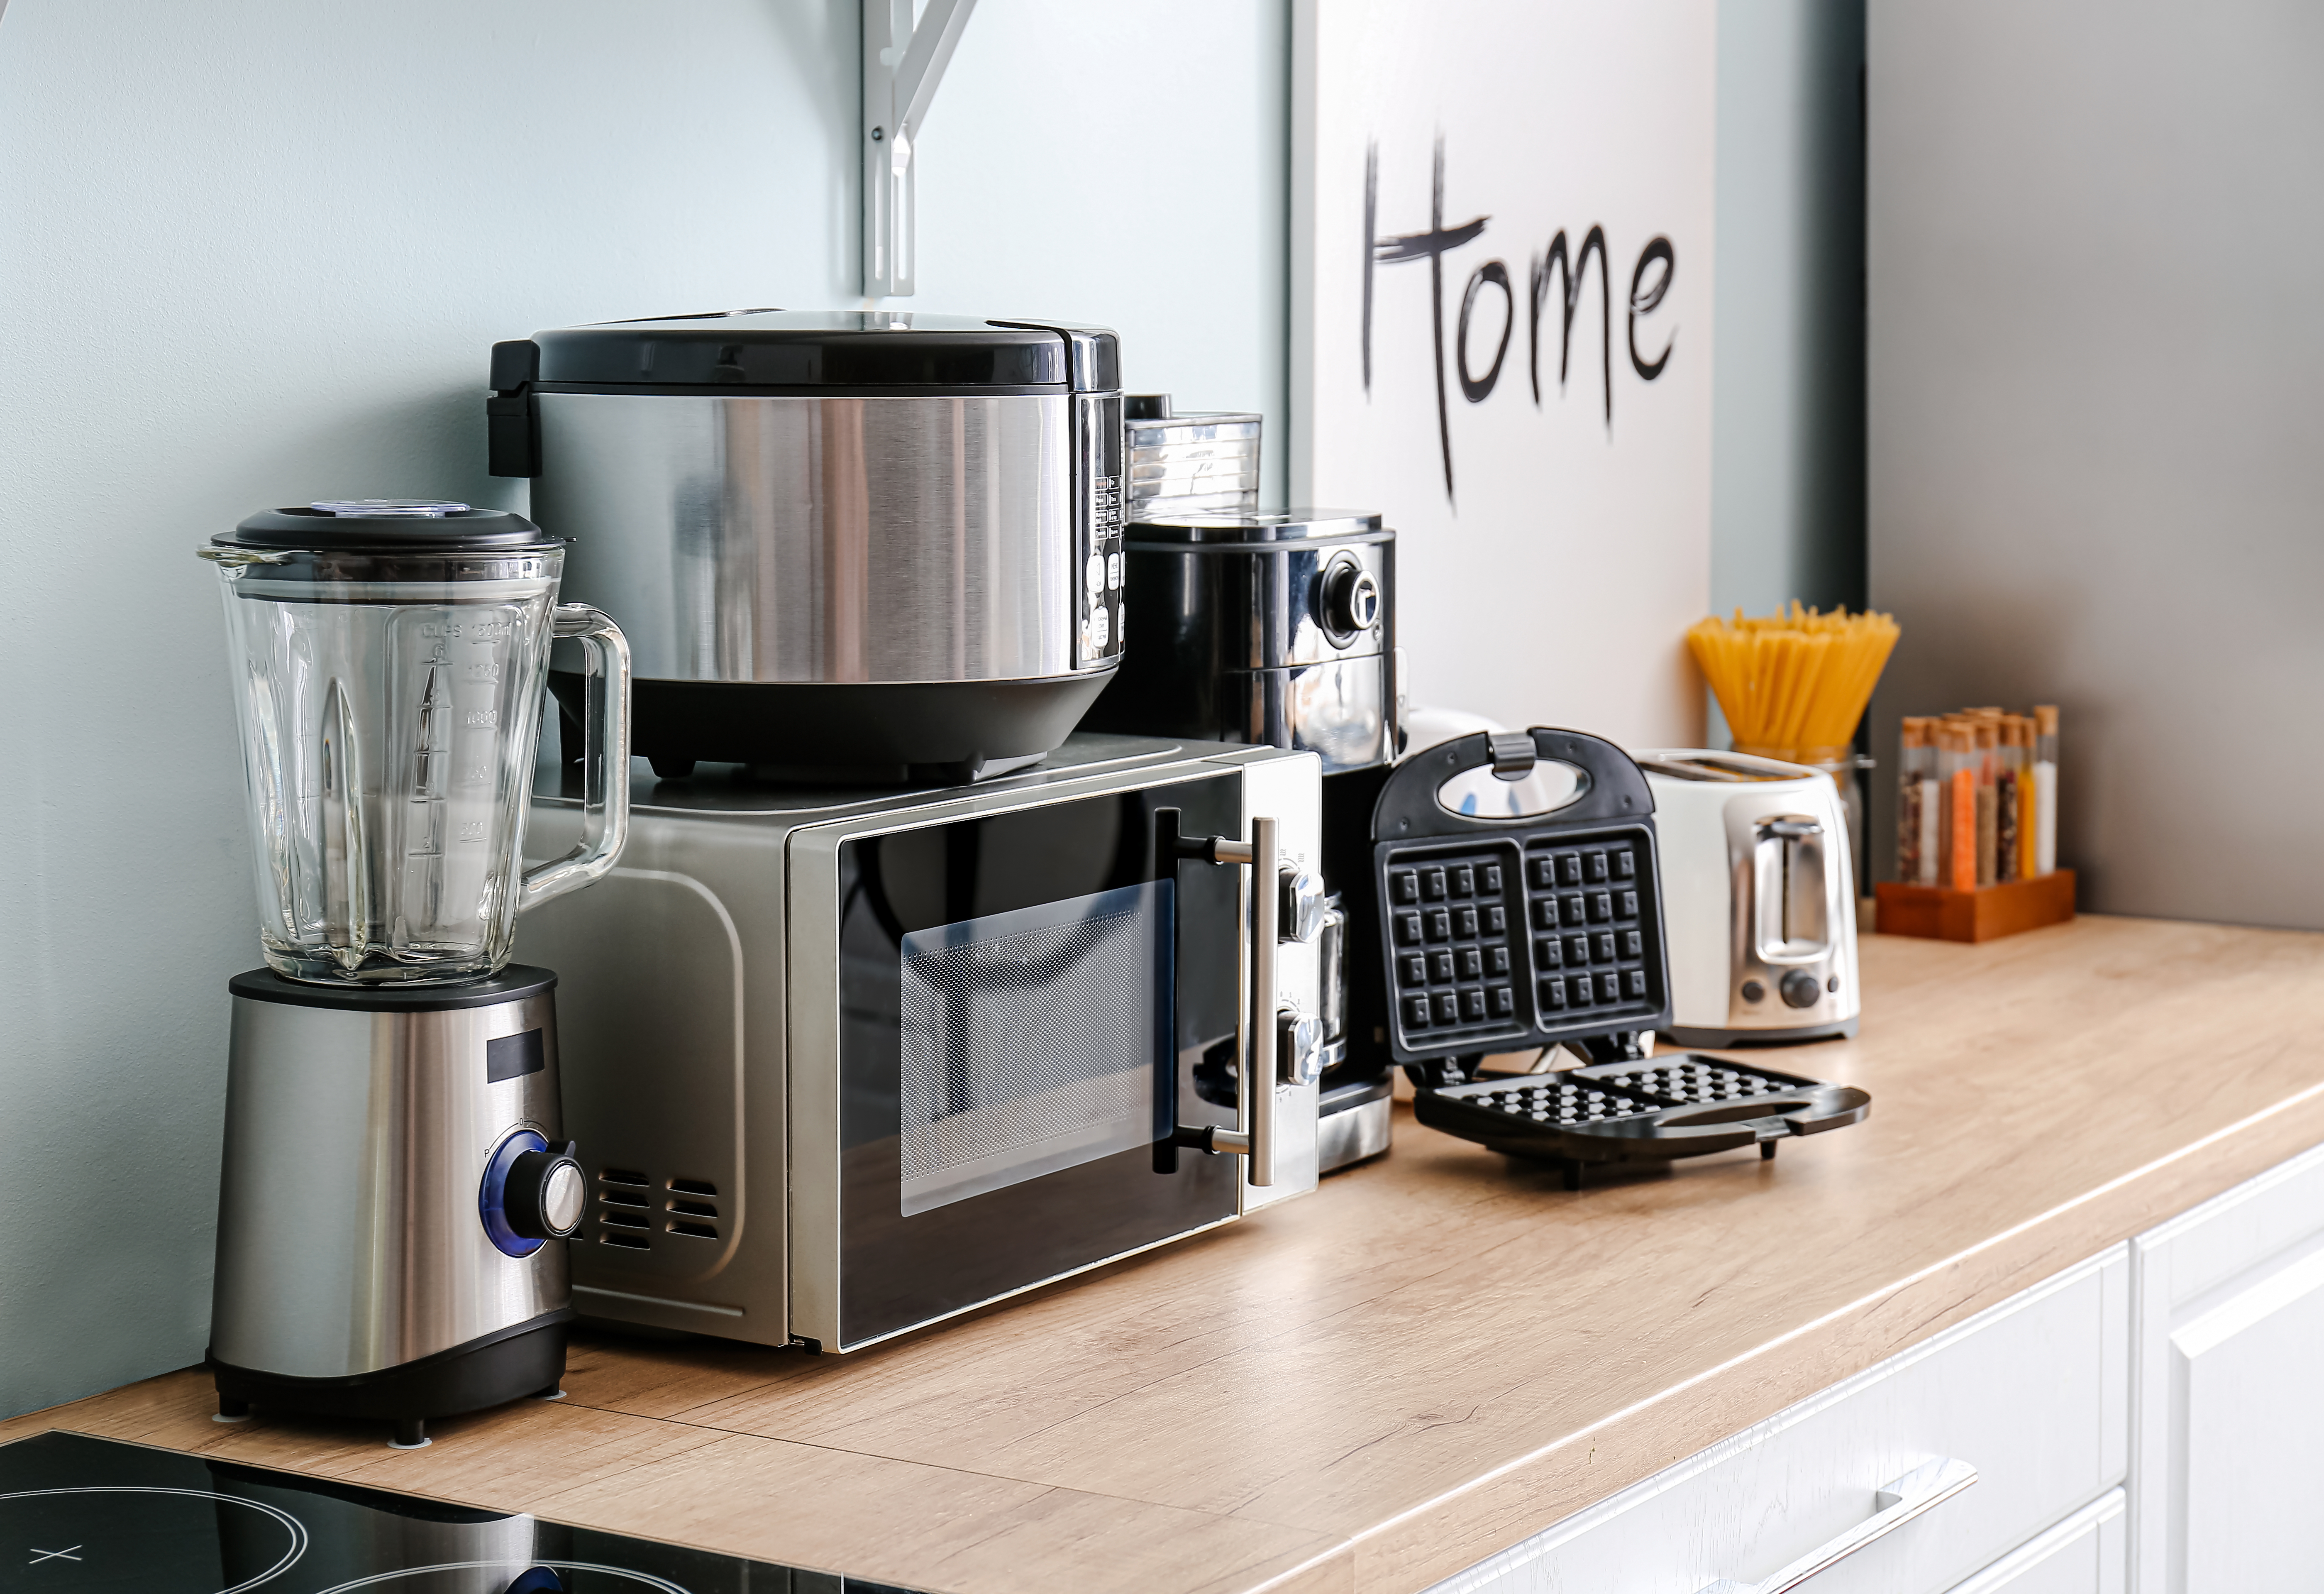 Why you should buy appliances from Amazon for an optimized household